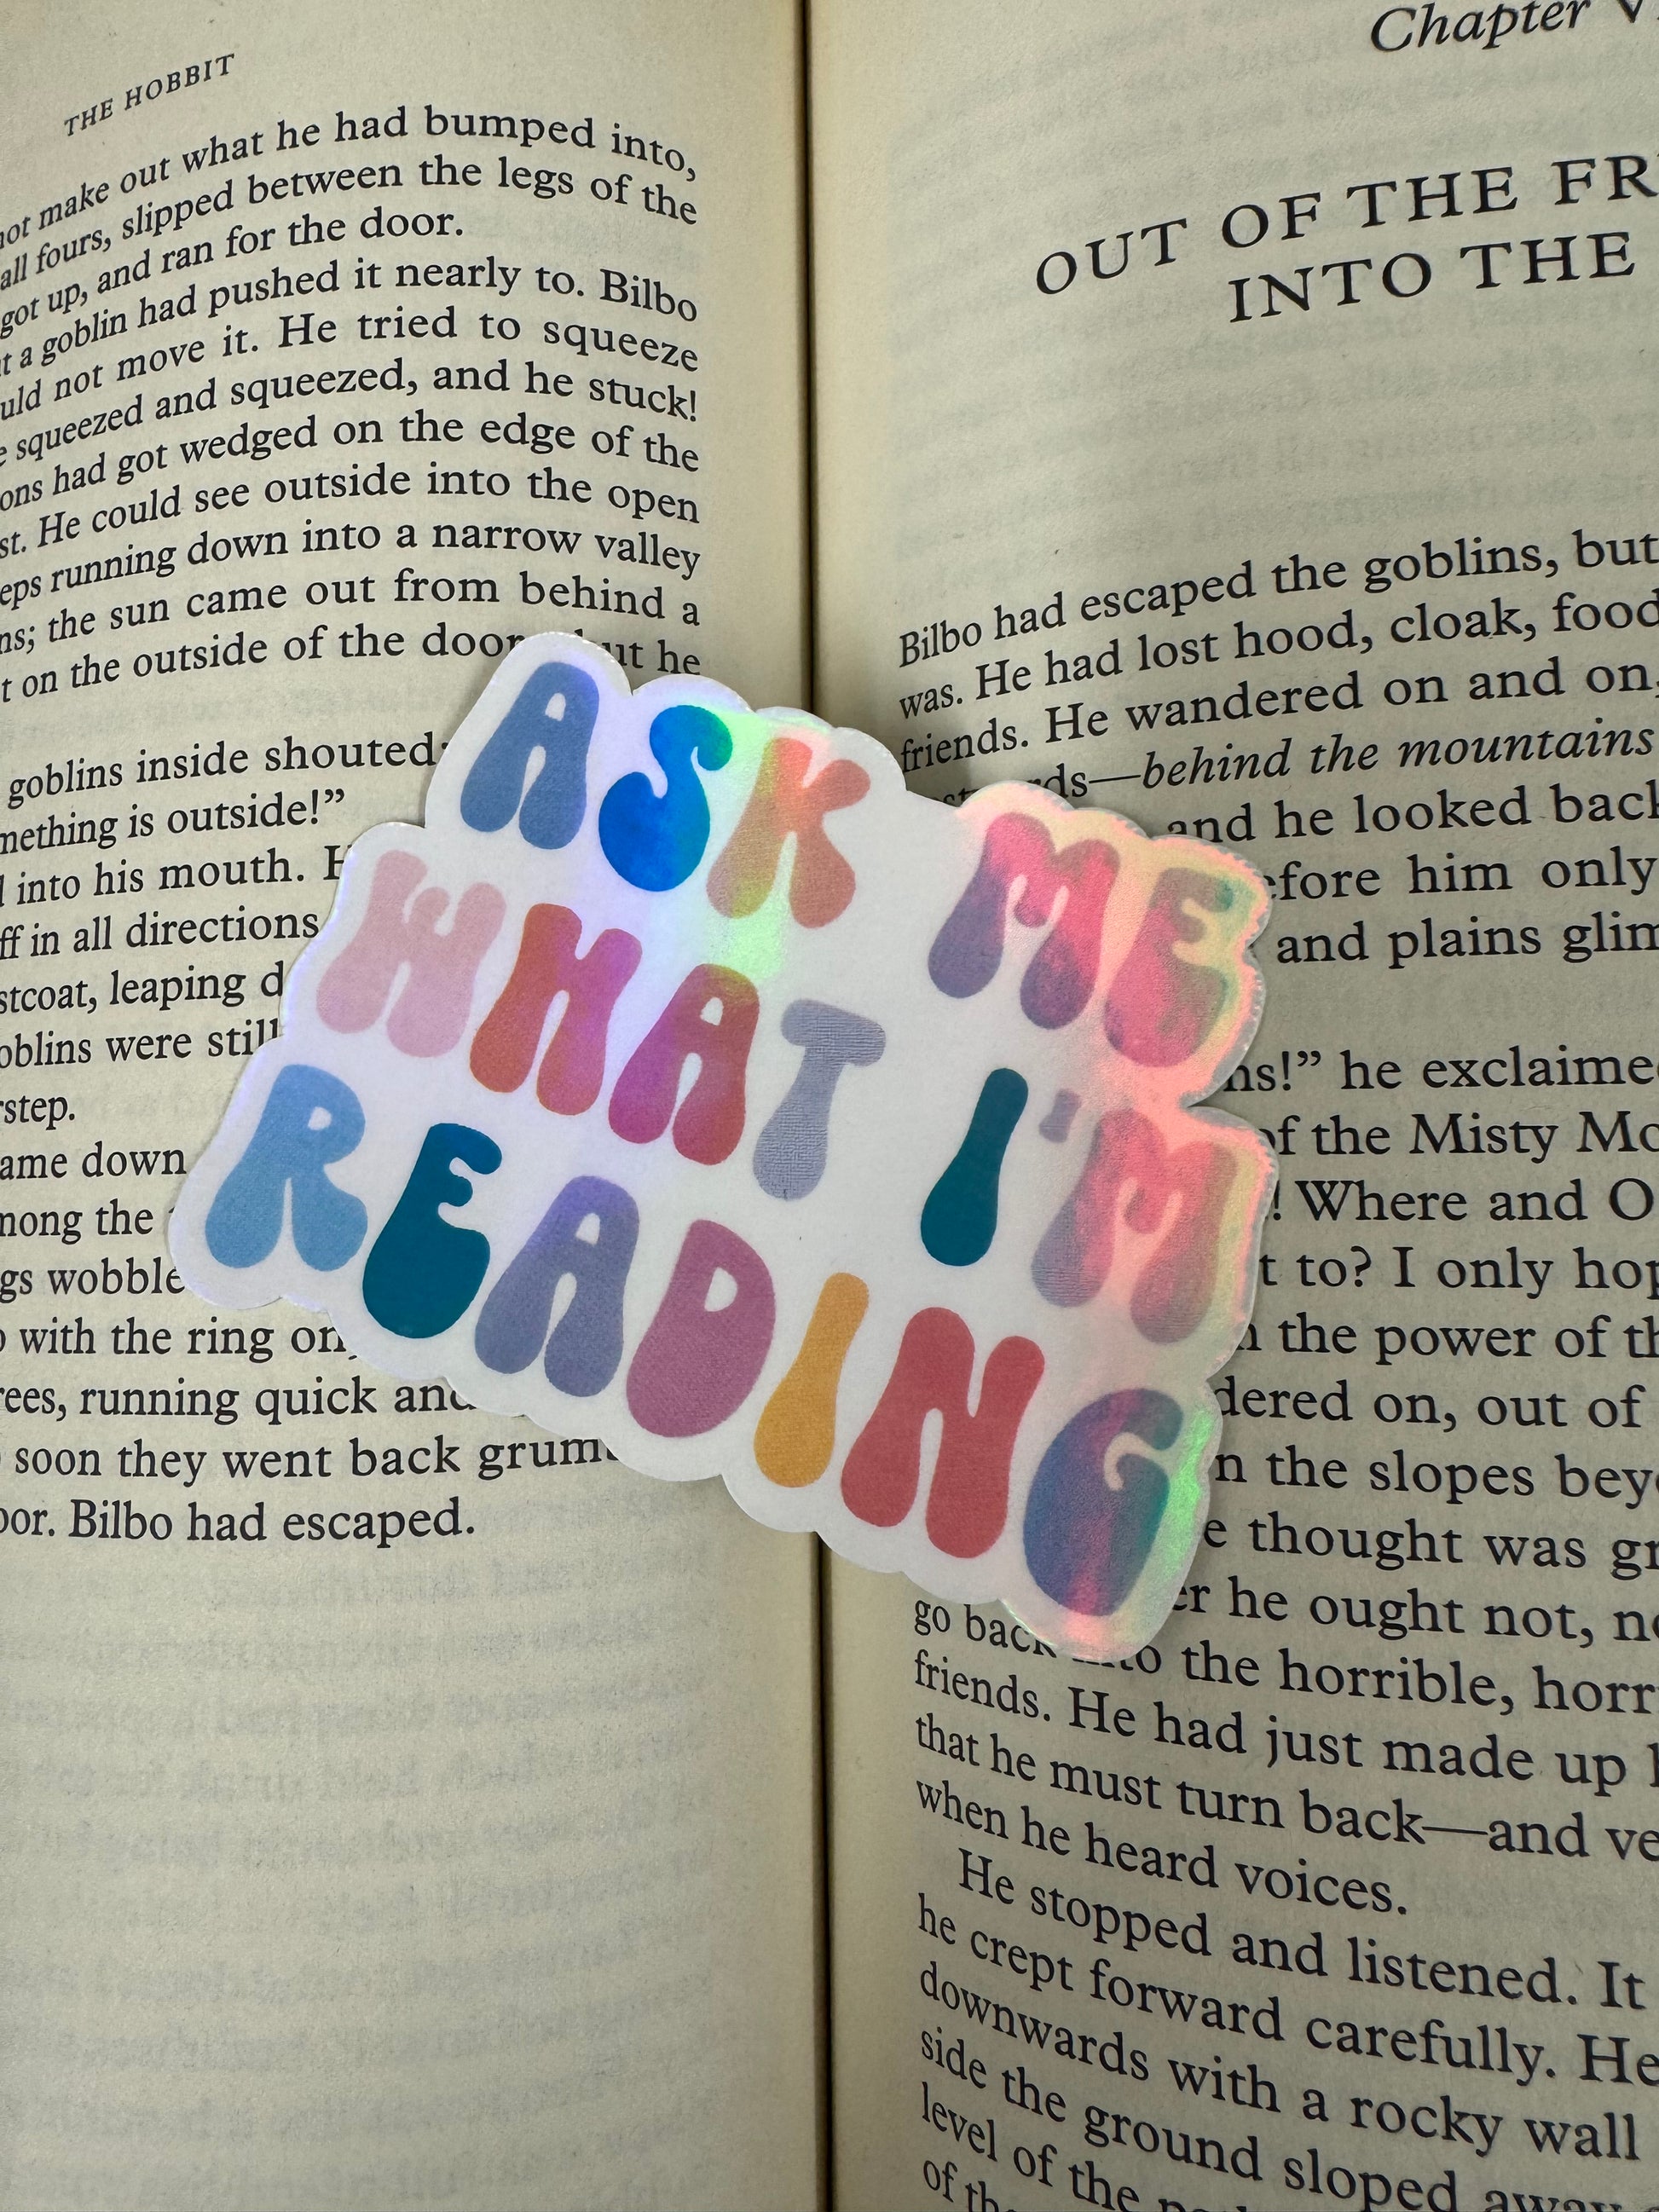 Ask Me What I'm Reading Holographic Sticker - Conversation Starter for Book Lovers